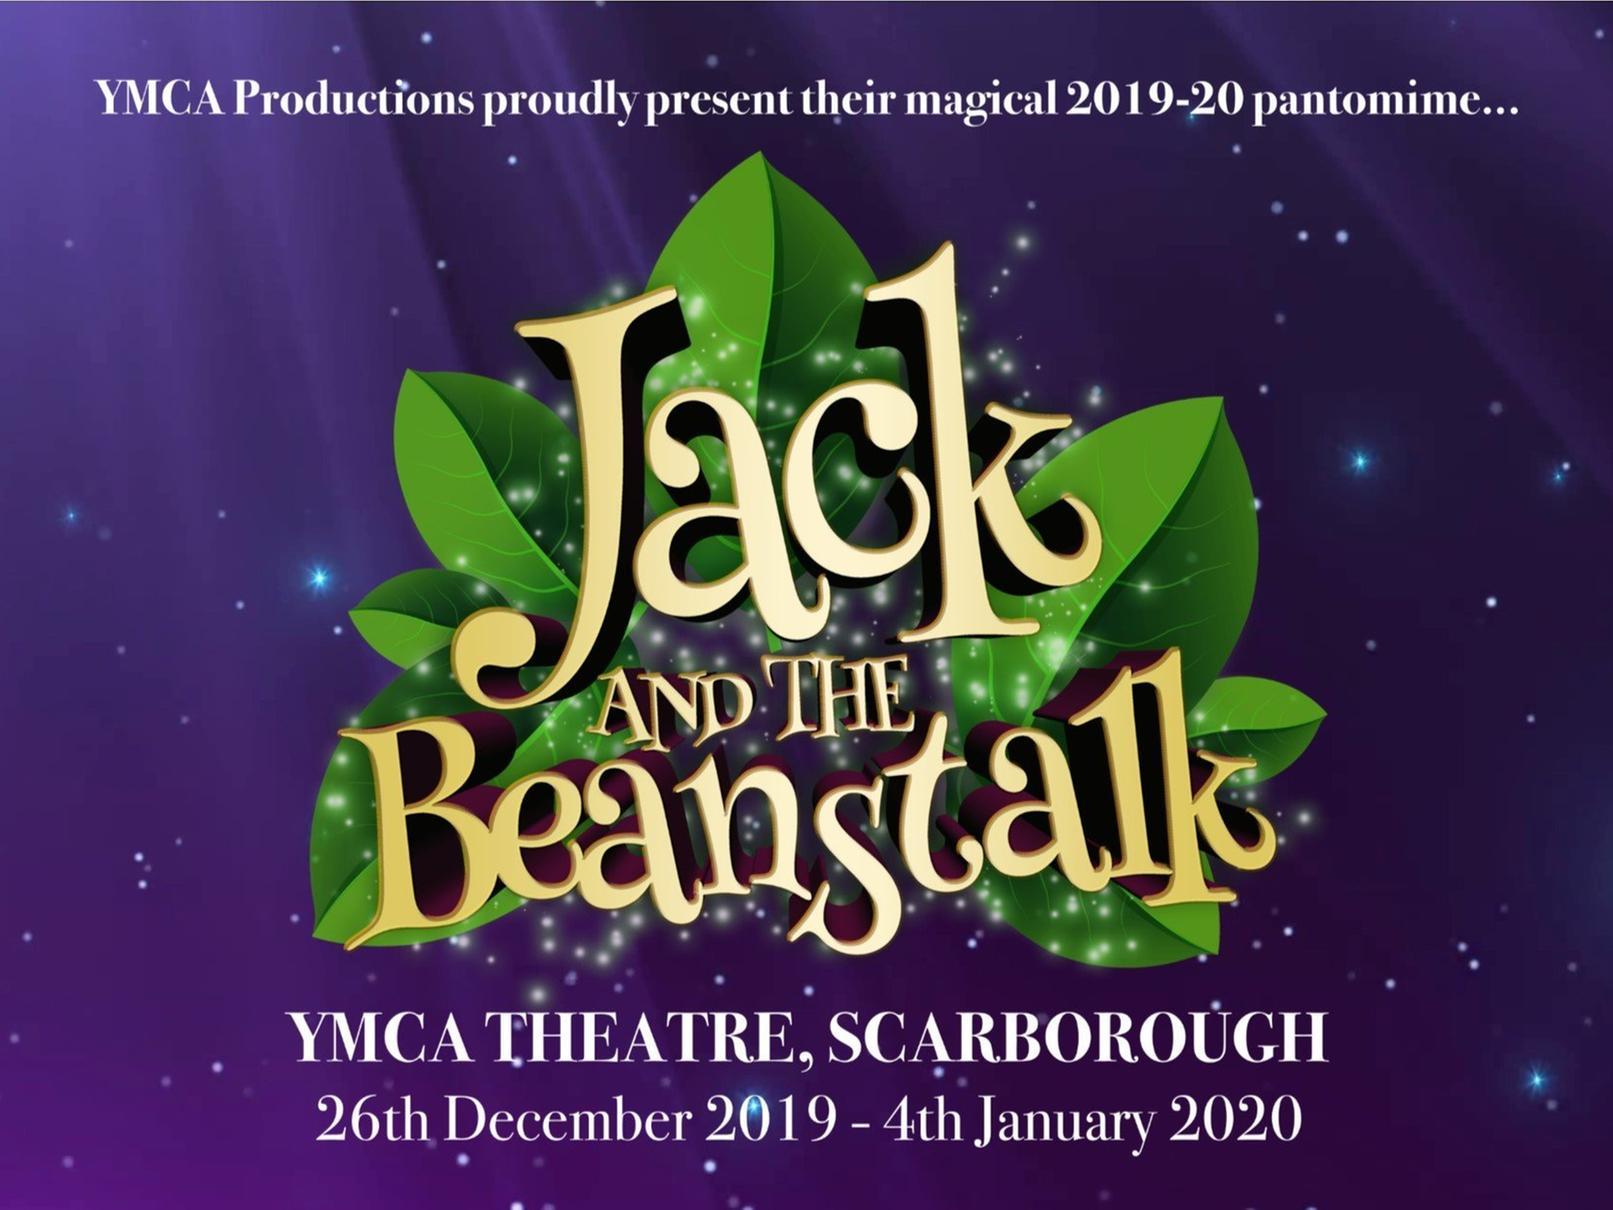 If you fancy spending the day watching a show, catch the YMCA's production of Jack and the Beanstalk at 2pm. Contact the venue for tickets.